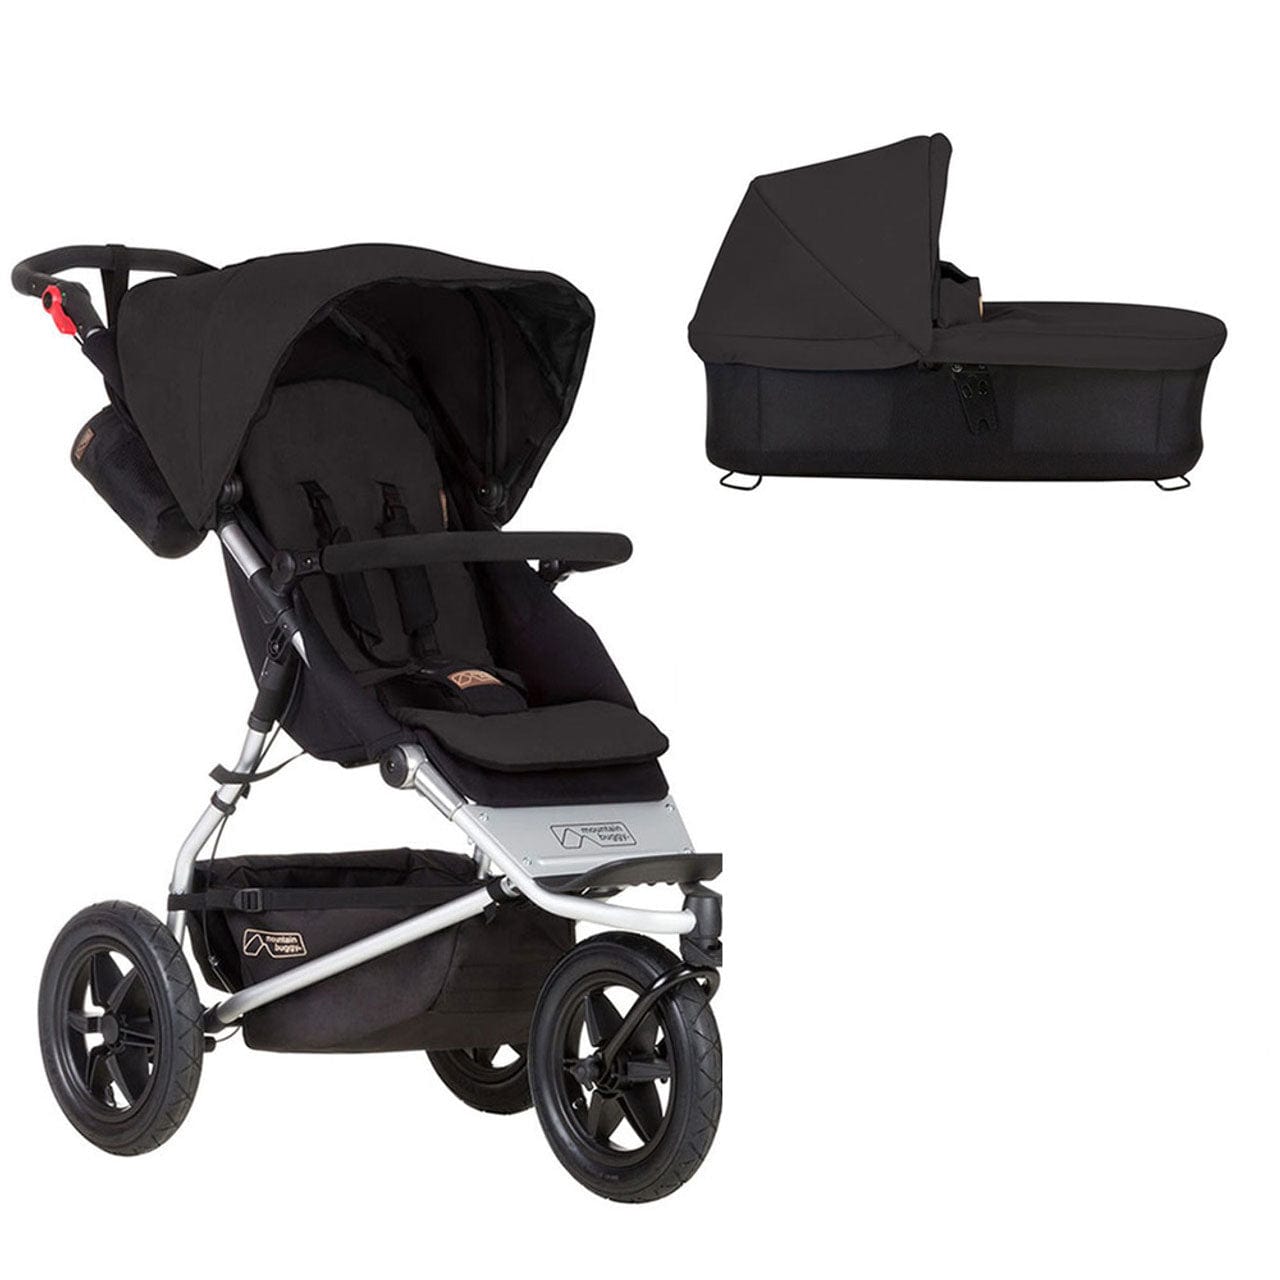 Mountain Buggy Urban Jungle Pushchair with Free Carrycot in Black 3 Wheelers 12203-BLK